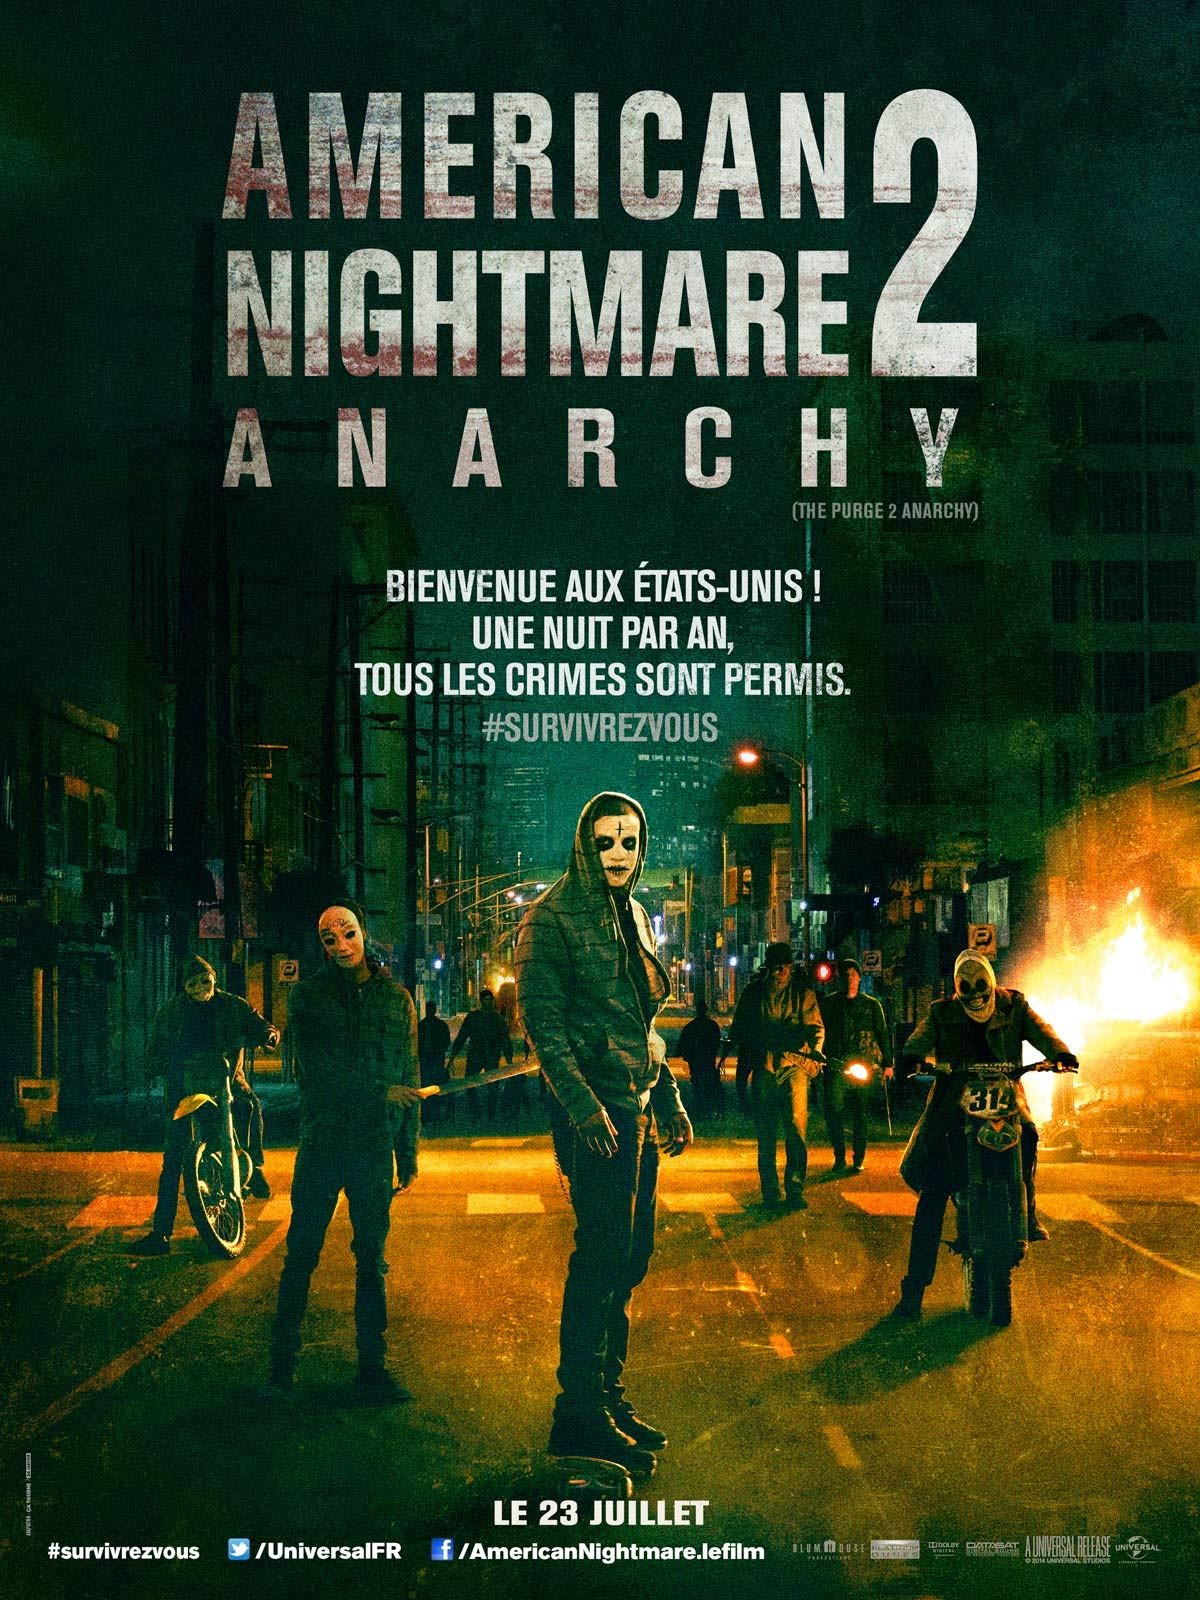 http://fuckingcinephiles.blogspot.fr/2014/07/critique-american-nightmare-2-anarchy.html